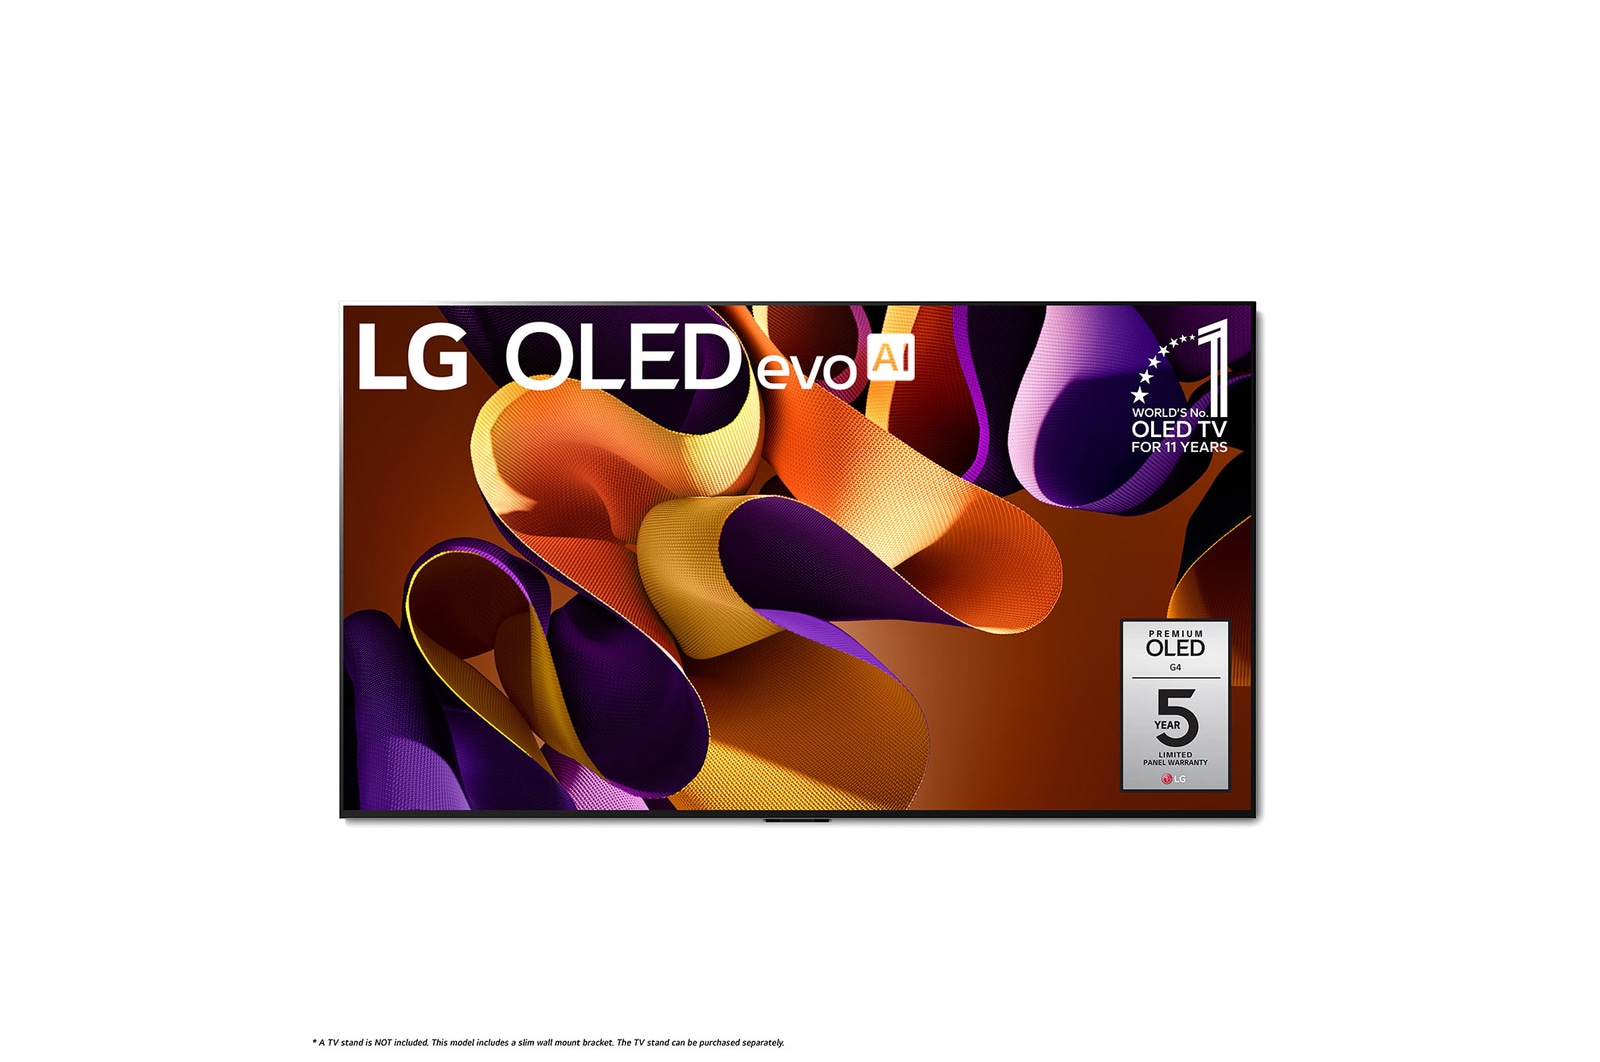 Front view of 83 Inch LG OLED evo AI G4 4K Smart TV 2024 OLED83G4WUA, with 11 Years of world number 1 OLED Emblem and 5-Year Panel Warranty logo on screen.